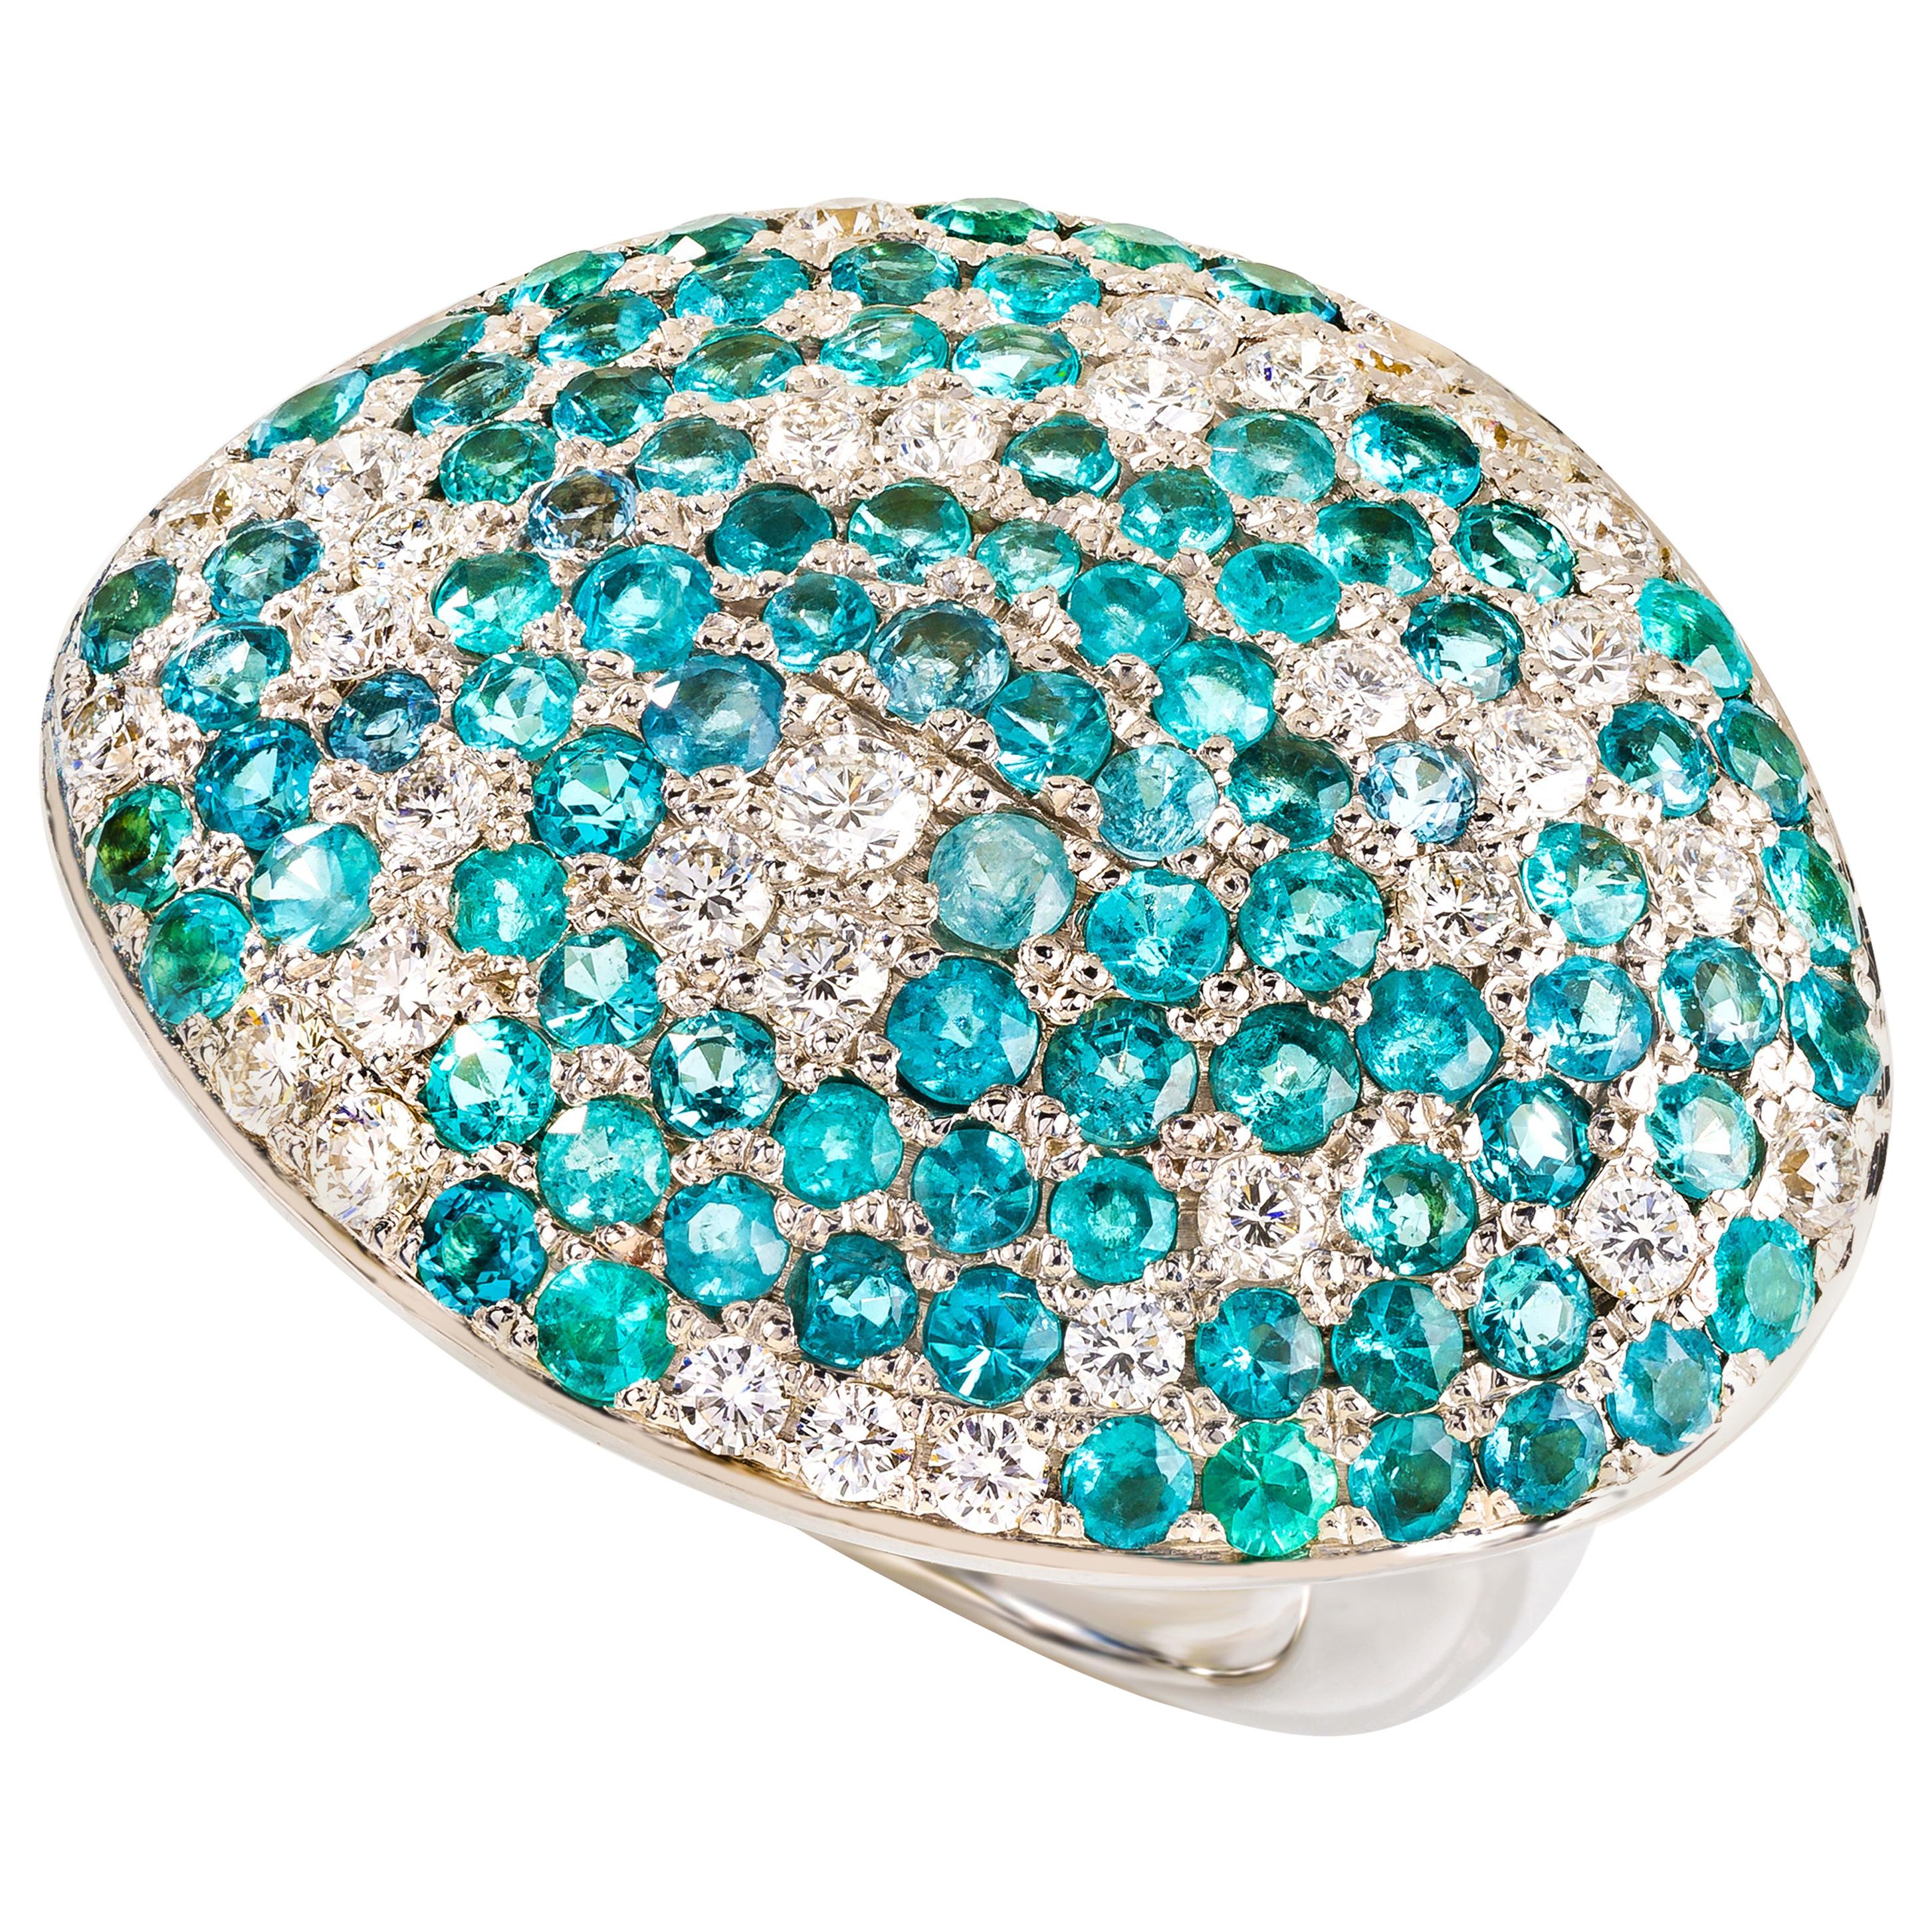 Rosior one-off Paraiba Tourmaline and Diamond Cocktail Ring set in White Gold